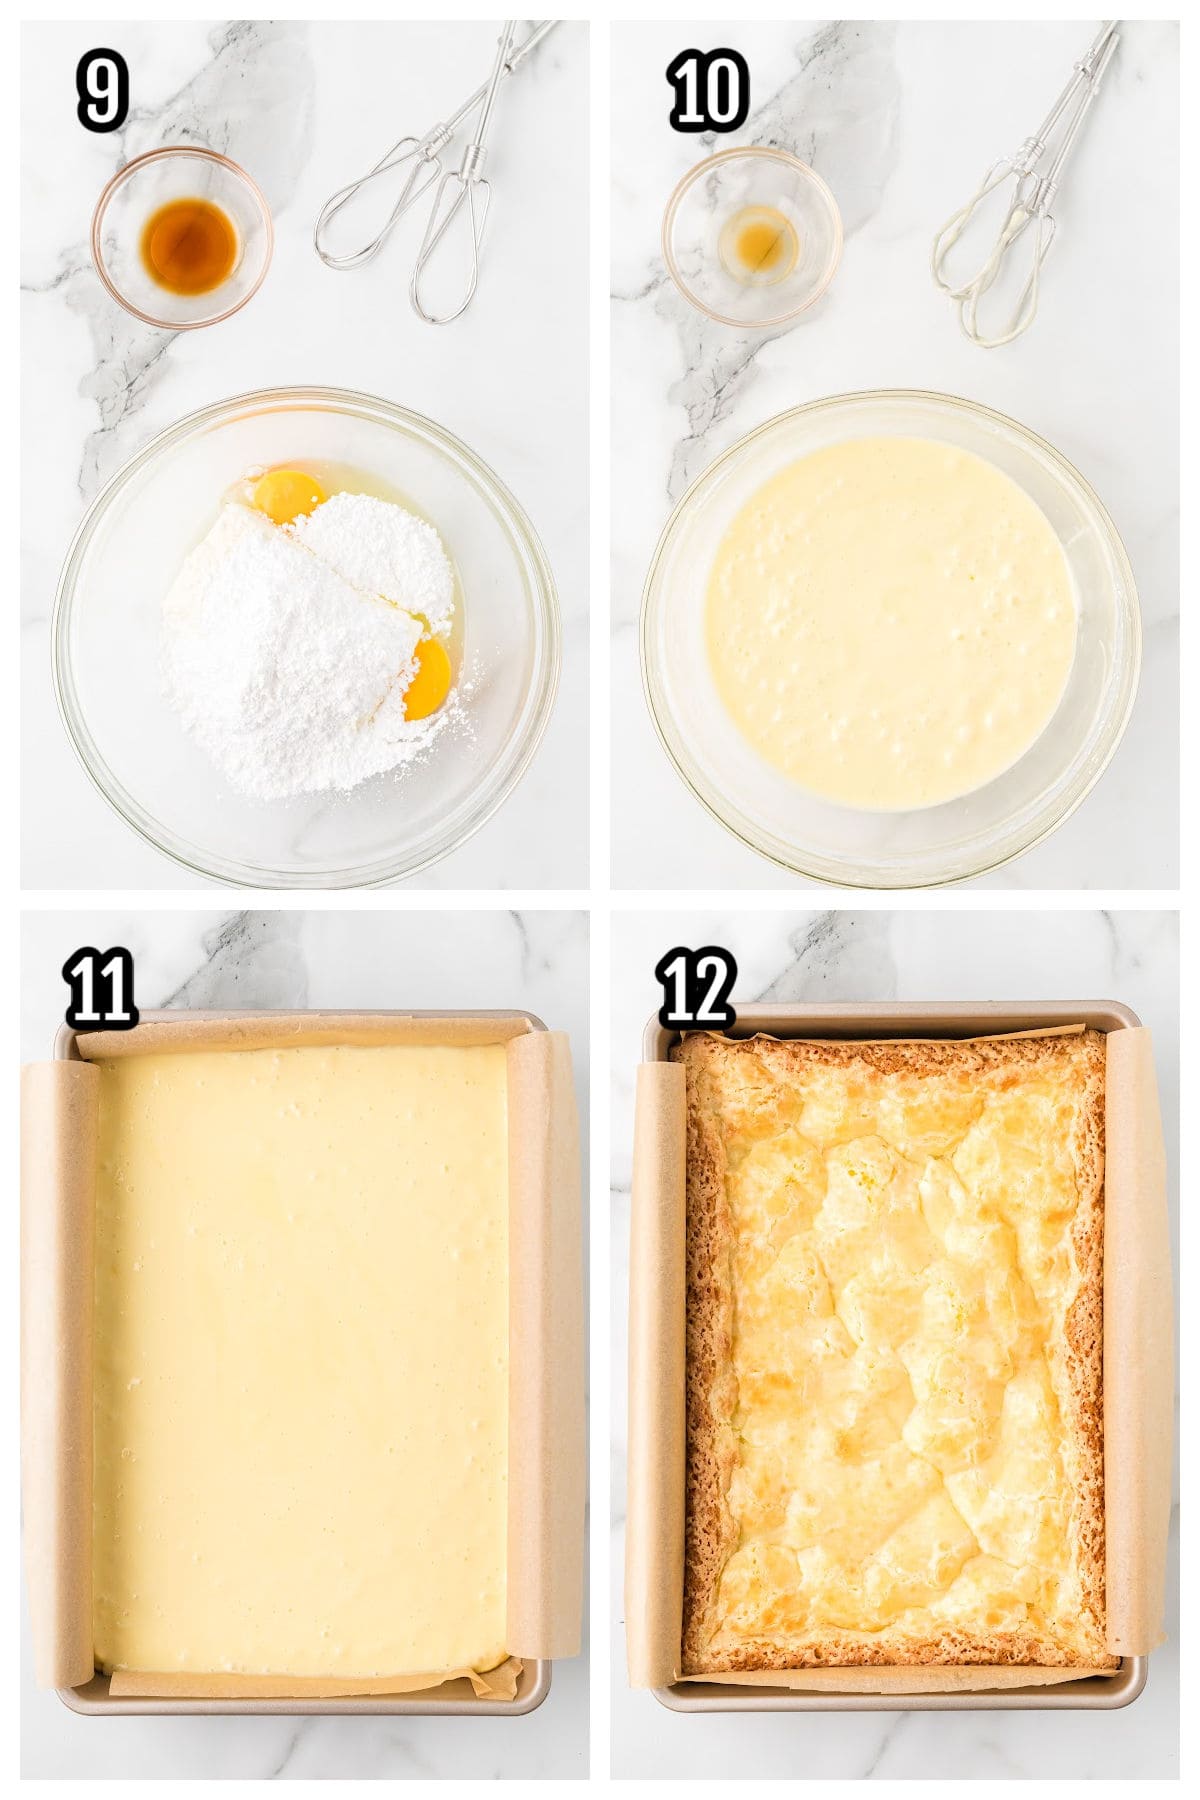 The final collage shows the last four steps to finishing and baking the dessert bars. 